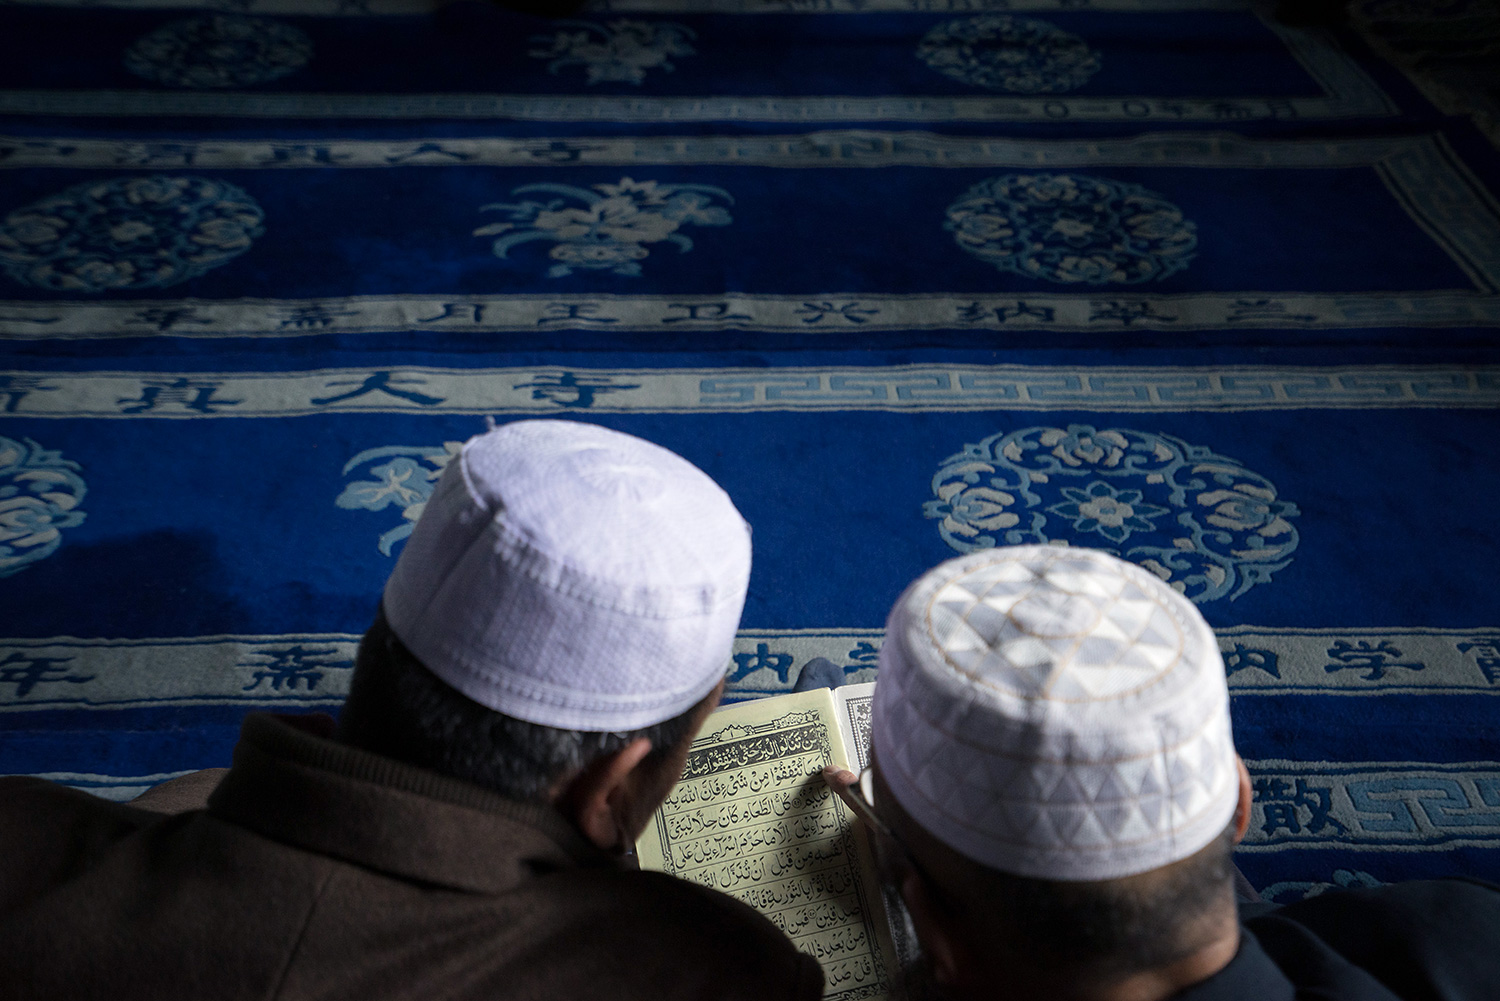 Men share a Quran while sitting on the floor in the main prayer hall of the Najiahu Mosque.